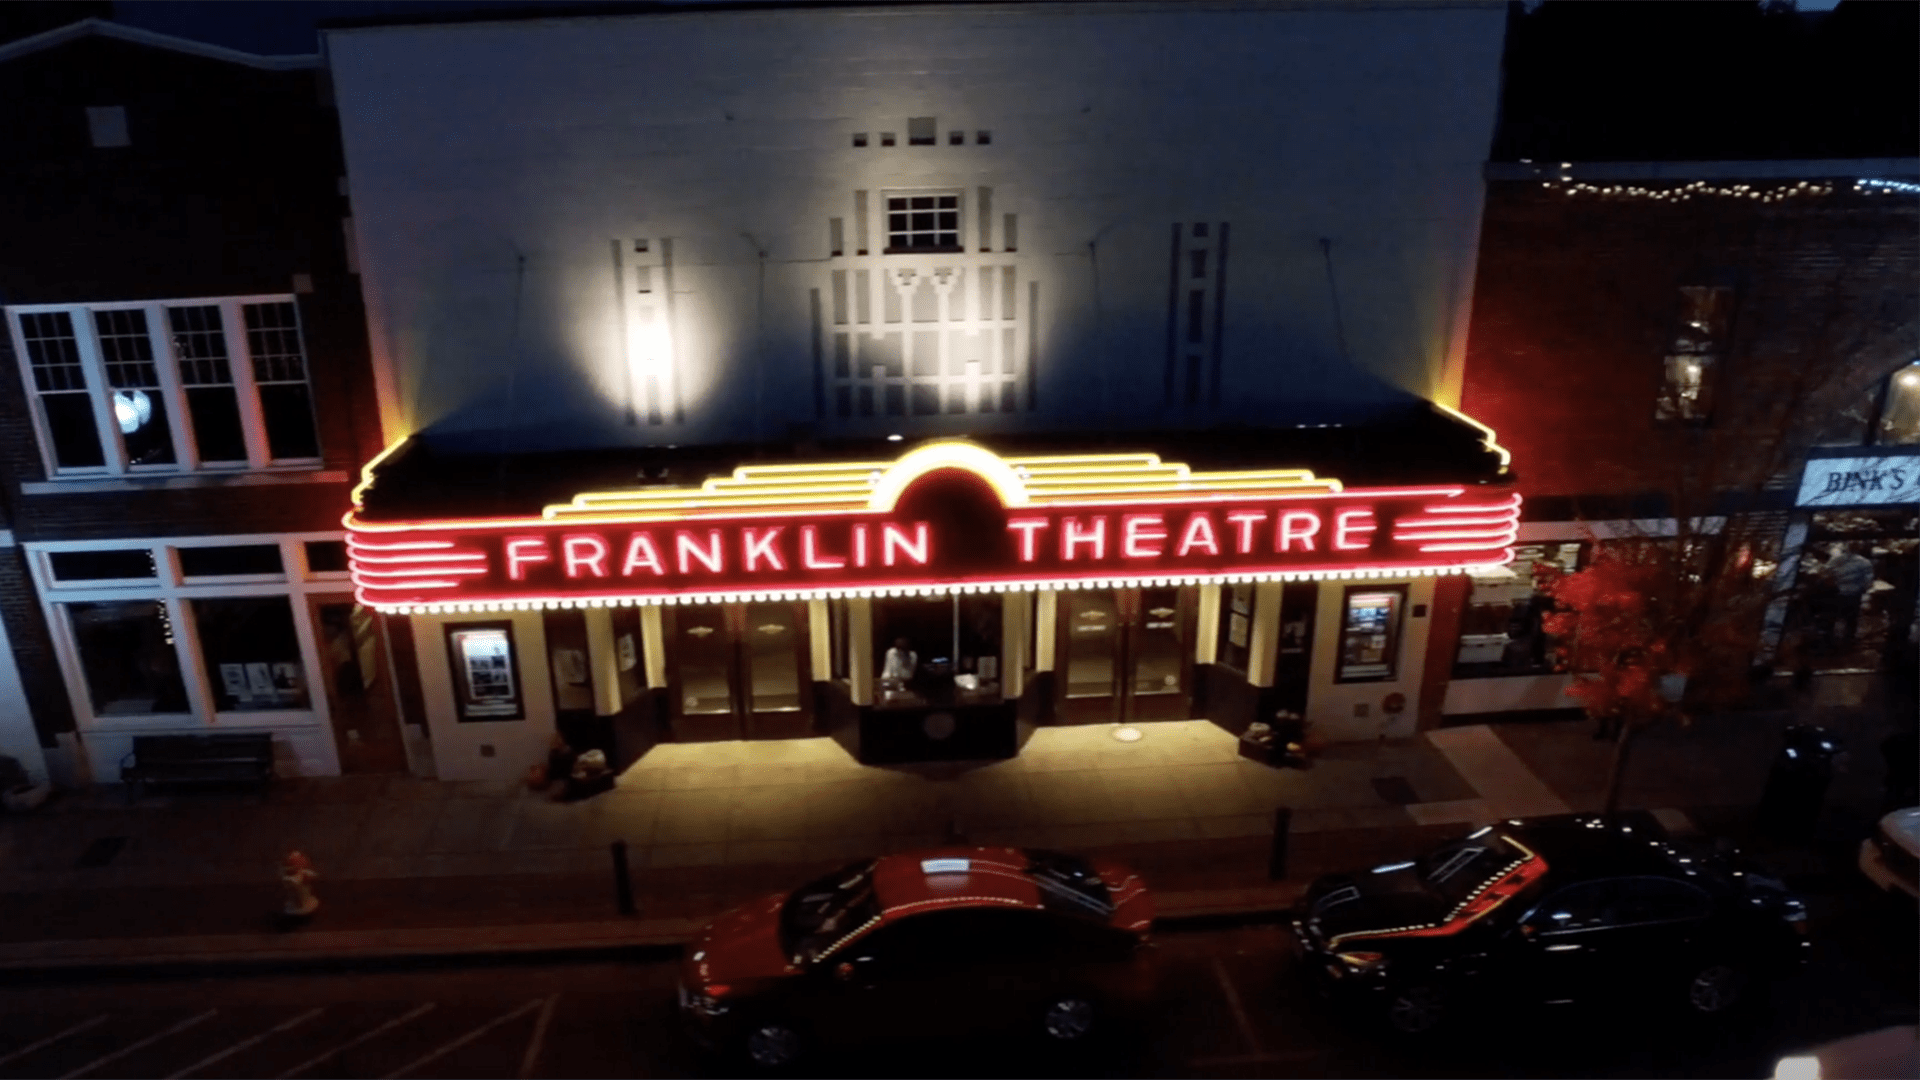 Help Support The Franklin Theatre FranklinTheatre